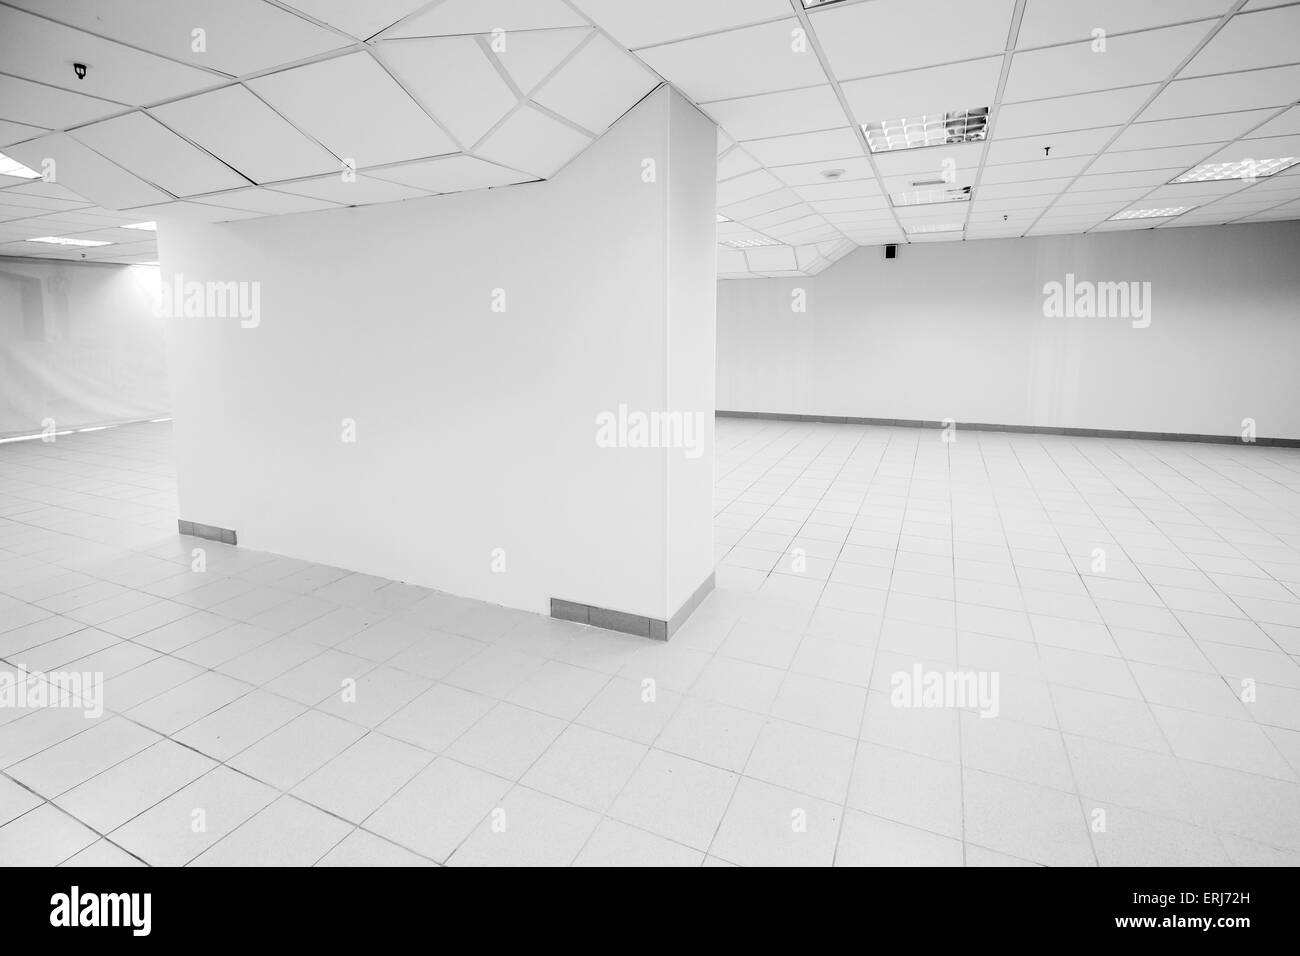 Open space, abstract empty office interior with white walls, lights and column Stock Photo